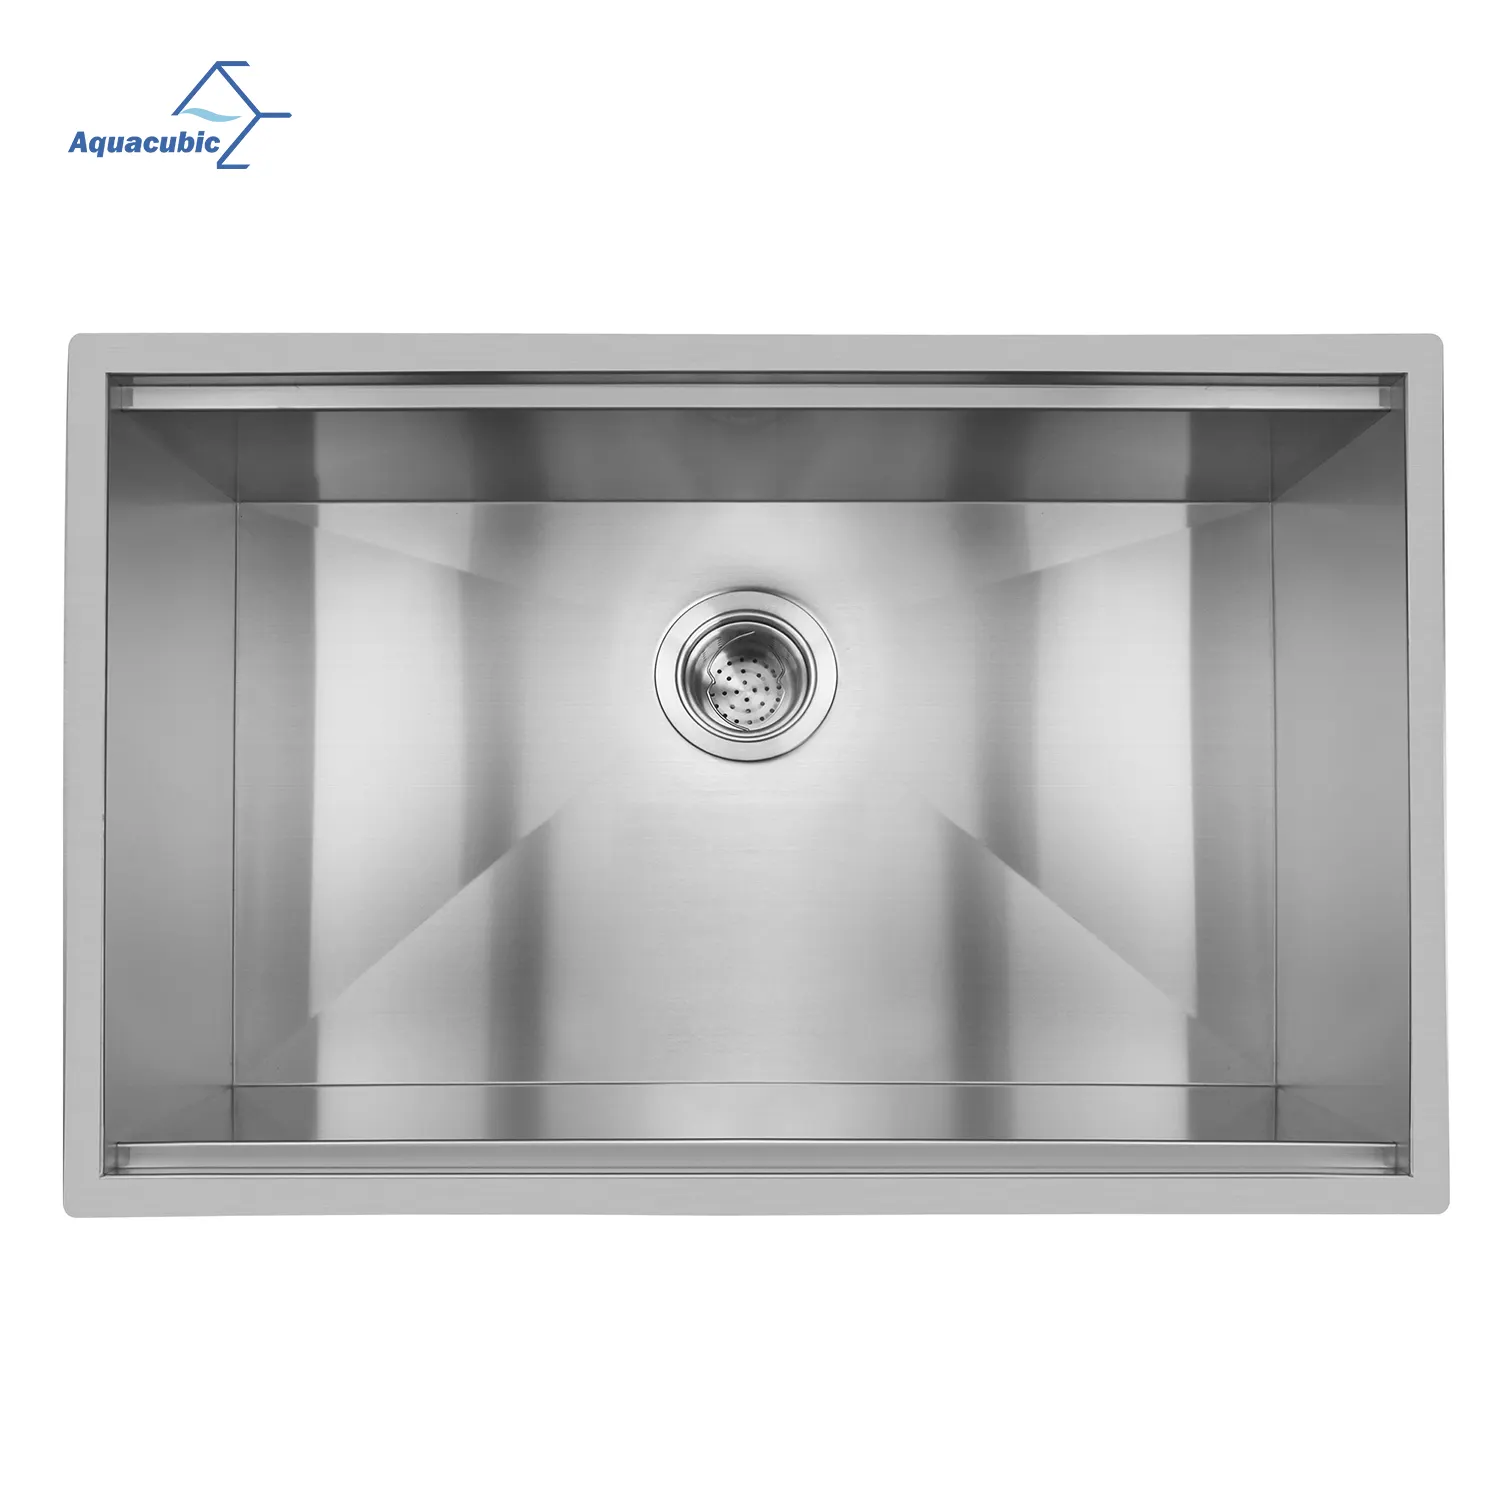 Aquacubic Undermount 30"x19" Inch 18 Gauge 304 Stainless Steel Workstation Kitchen Sink with 9" Single Bowl